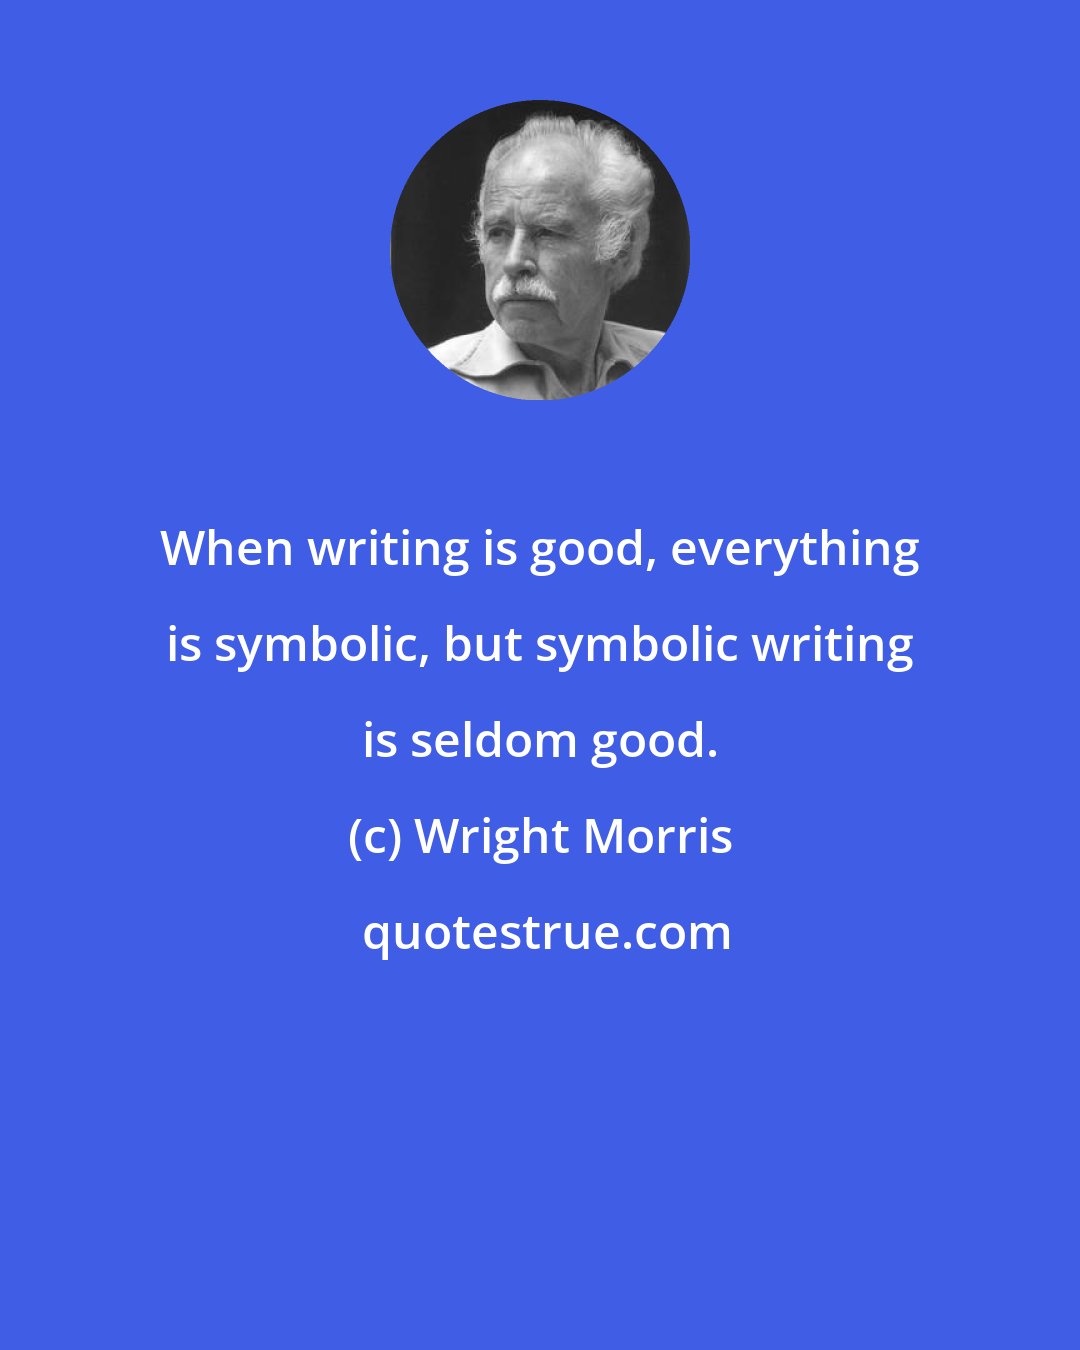 Wright Morris: When writing is good, everything is symbolic, but symbolic writing is seldom good.